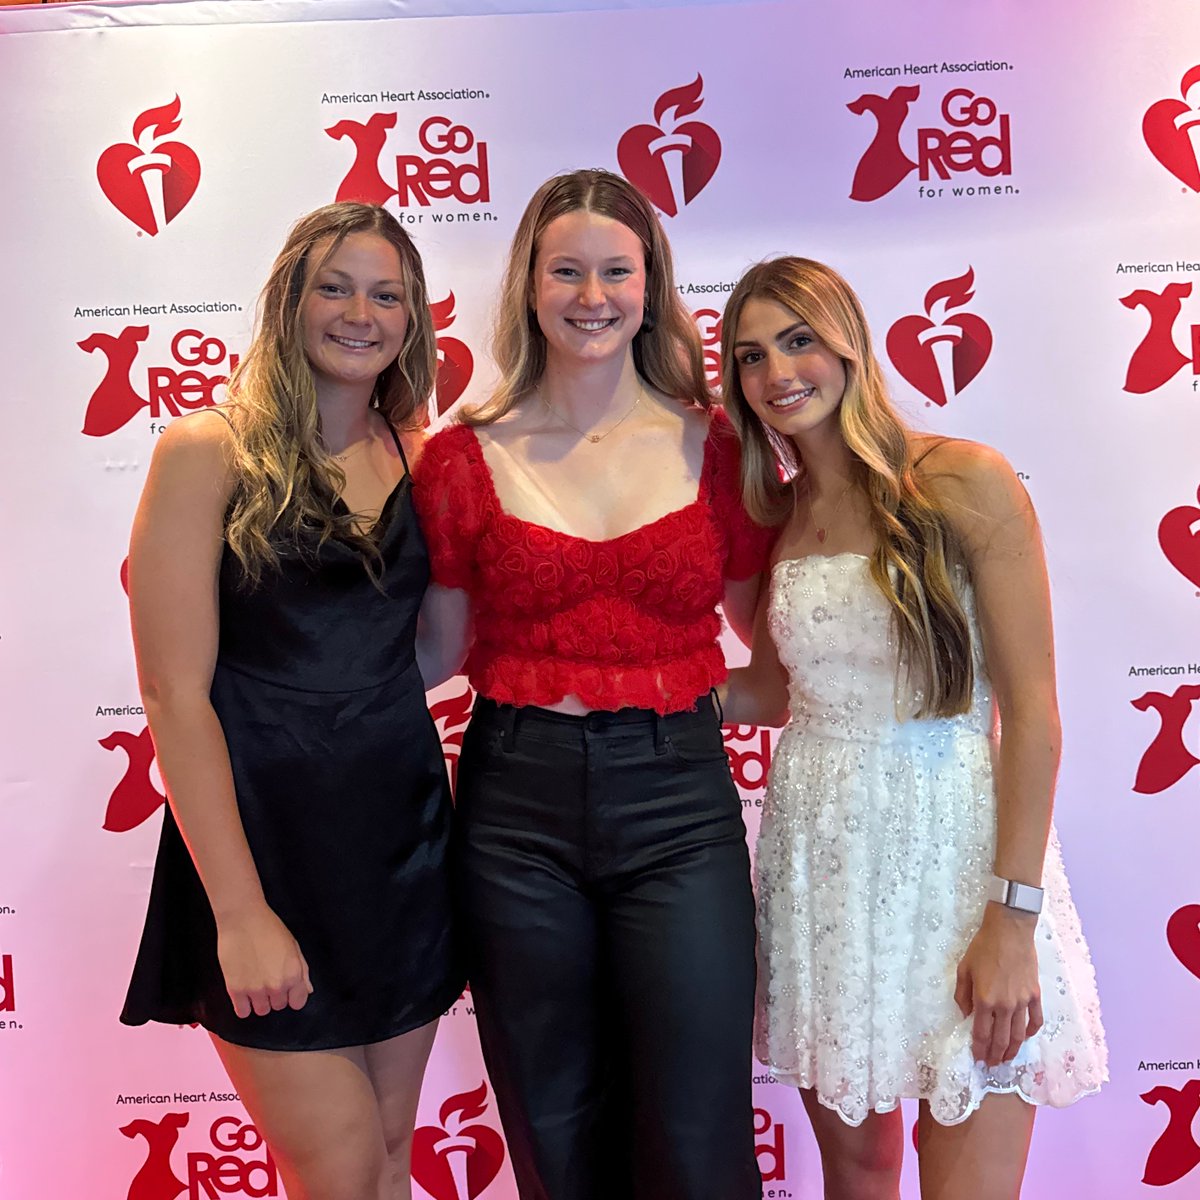 Last night we celebrated @BreechEllie at the @American_Heart Go Red for Women event 💙💛 #H2P x #GoRedForWomen